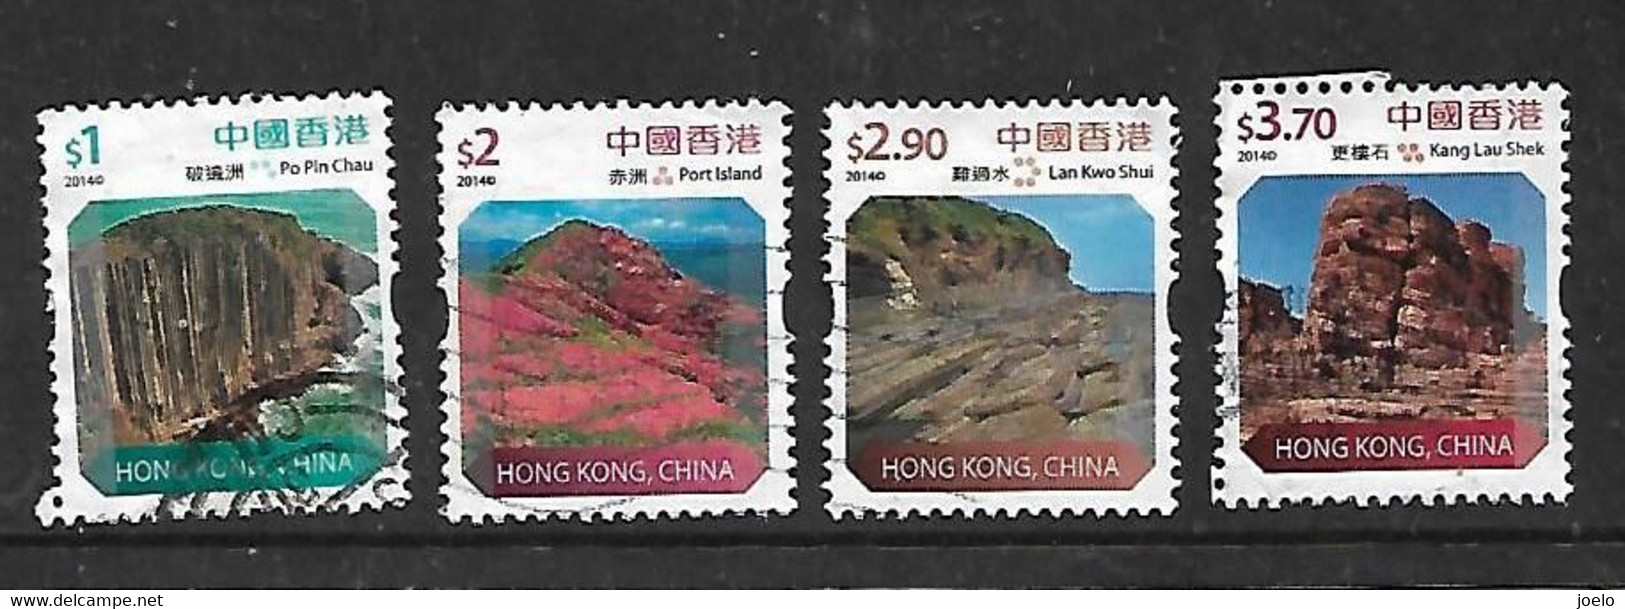 HONG KONG 2014 LANDSCAPES SELECTION TO $3.70 - Used Stamps